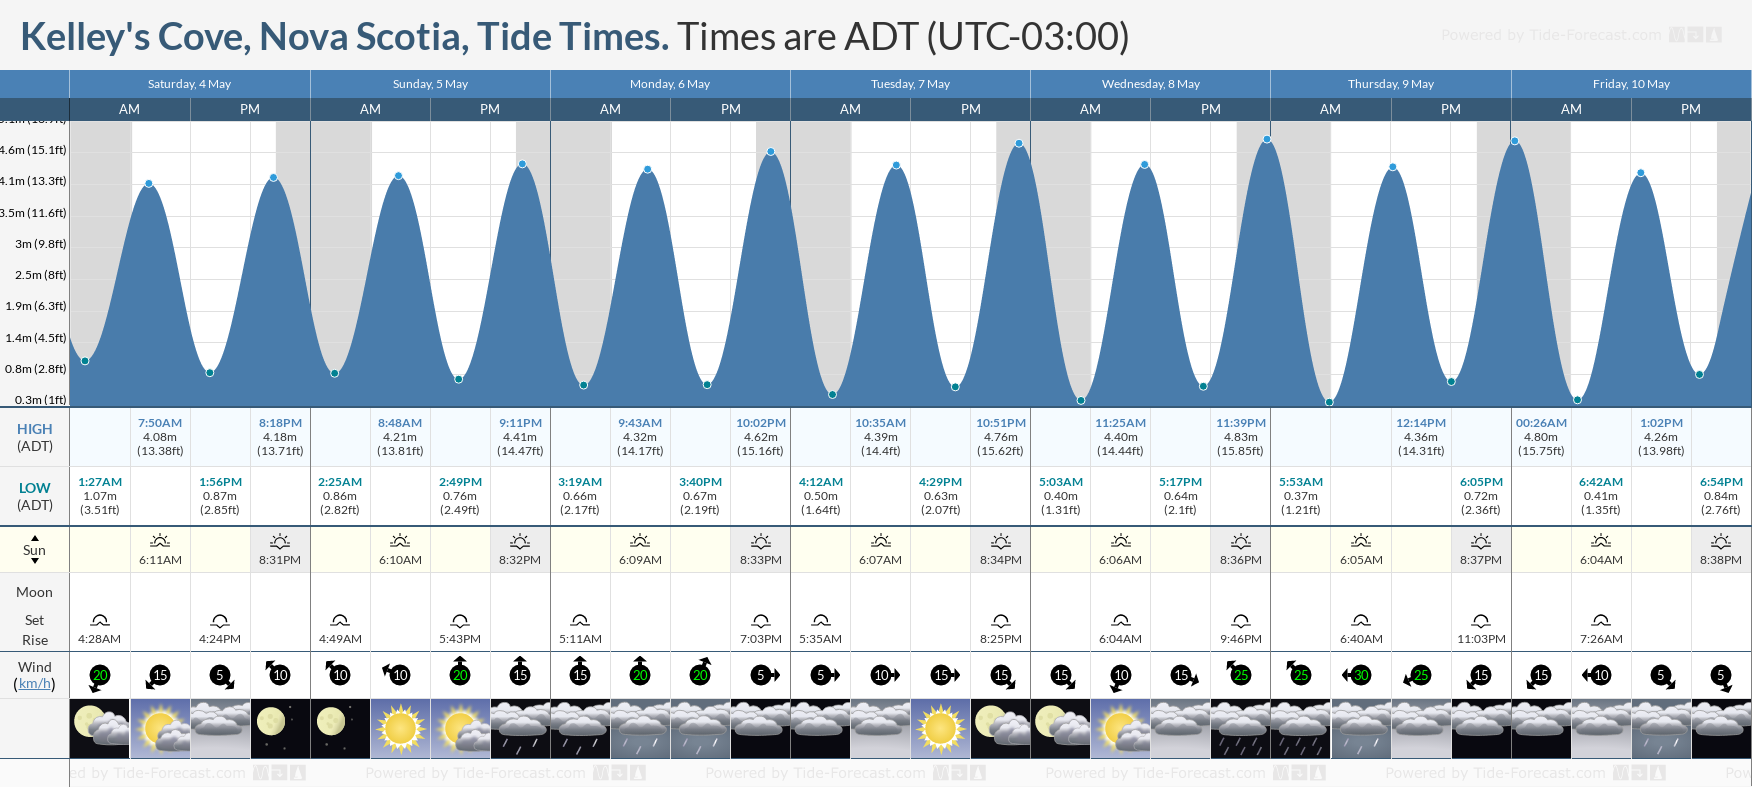 Kelley's Cove, Nova Scotia Tide Chart including high and low tide times for the next 7 days